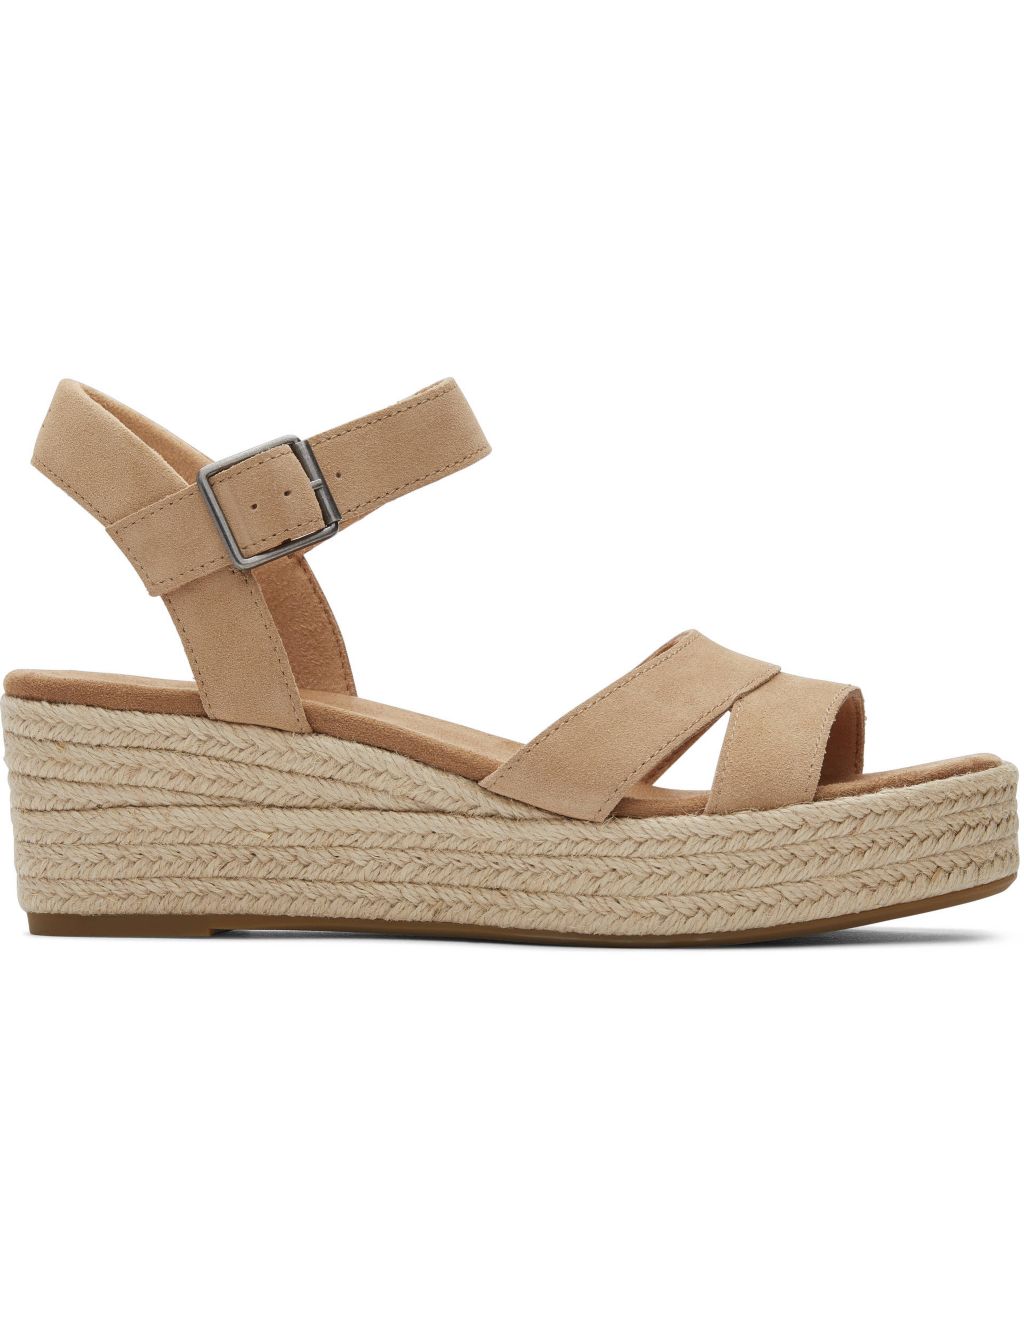 Suede Ankle Strap Wedge Sandals 1 of 5